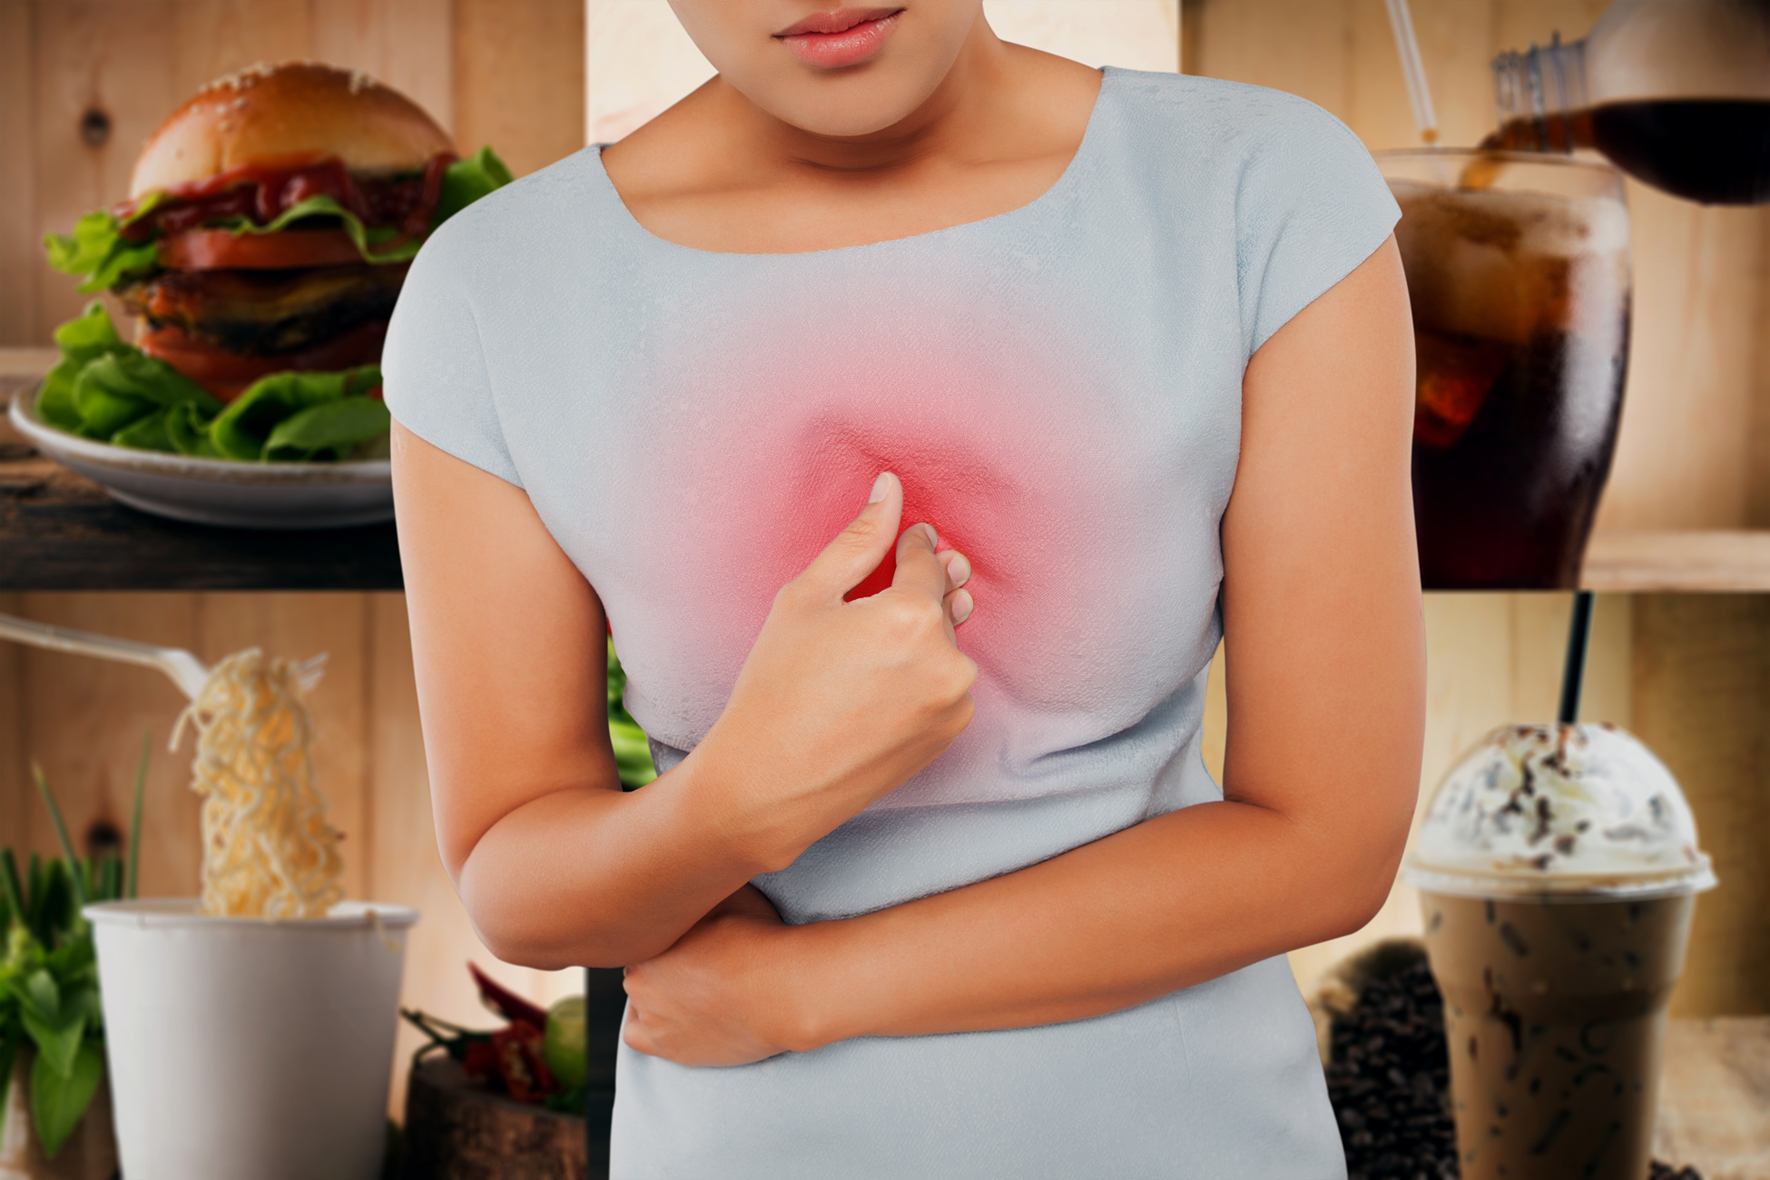 reflux and foods to avoid